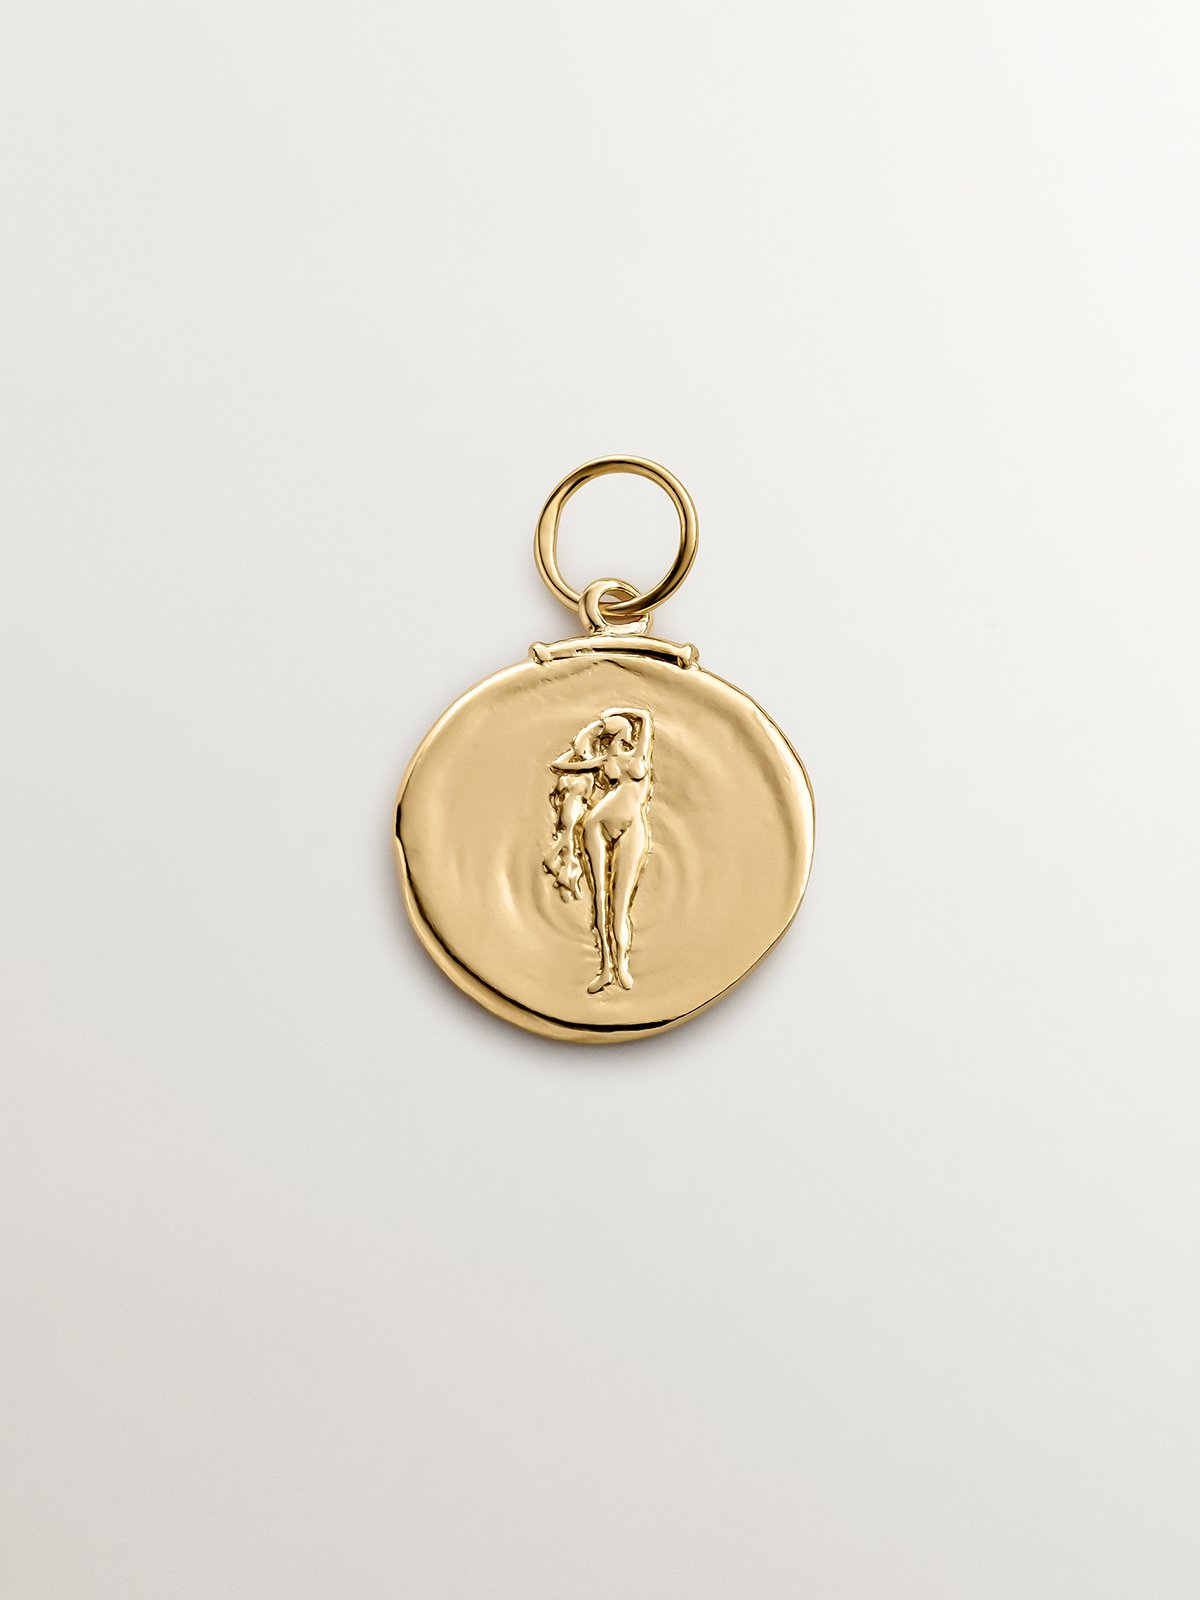 925 Silver Virgo Charm bathed in 18K Yellow Gold